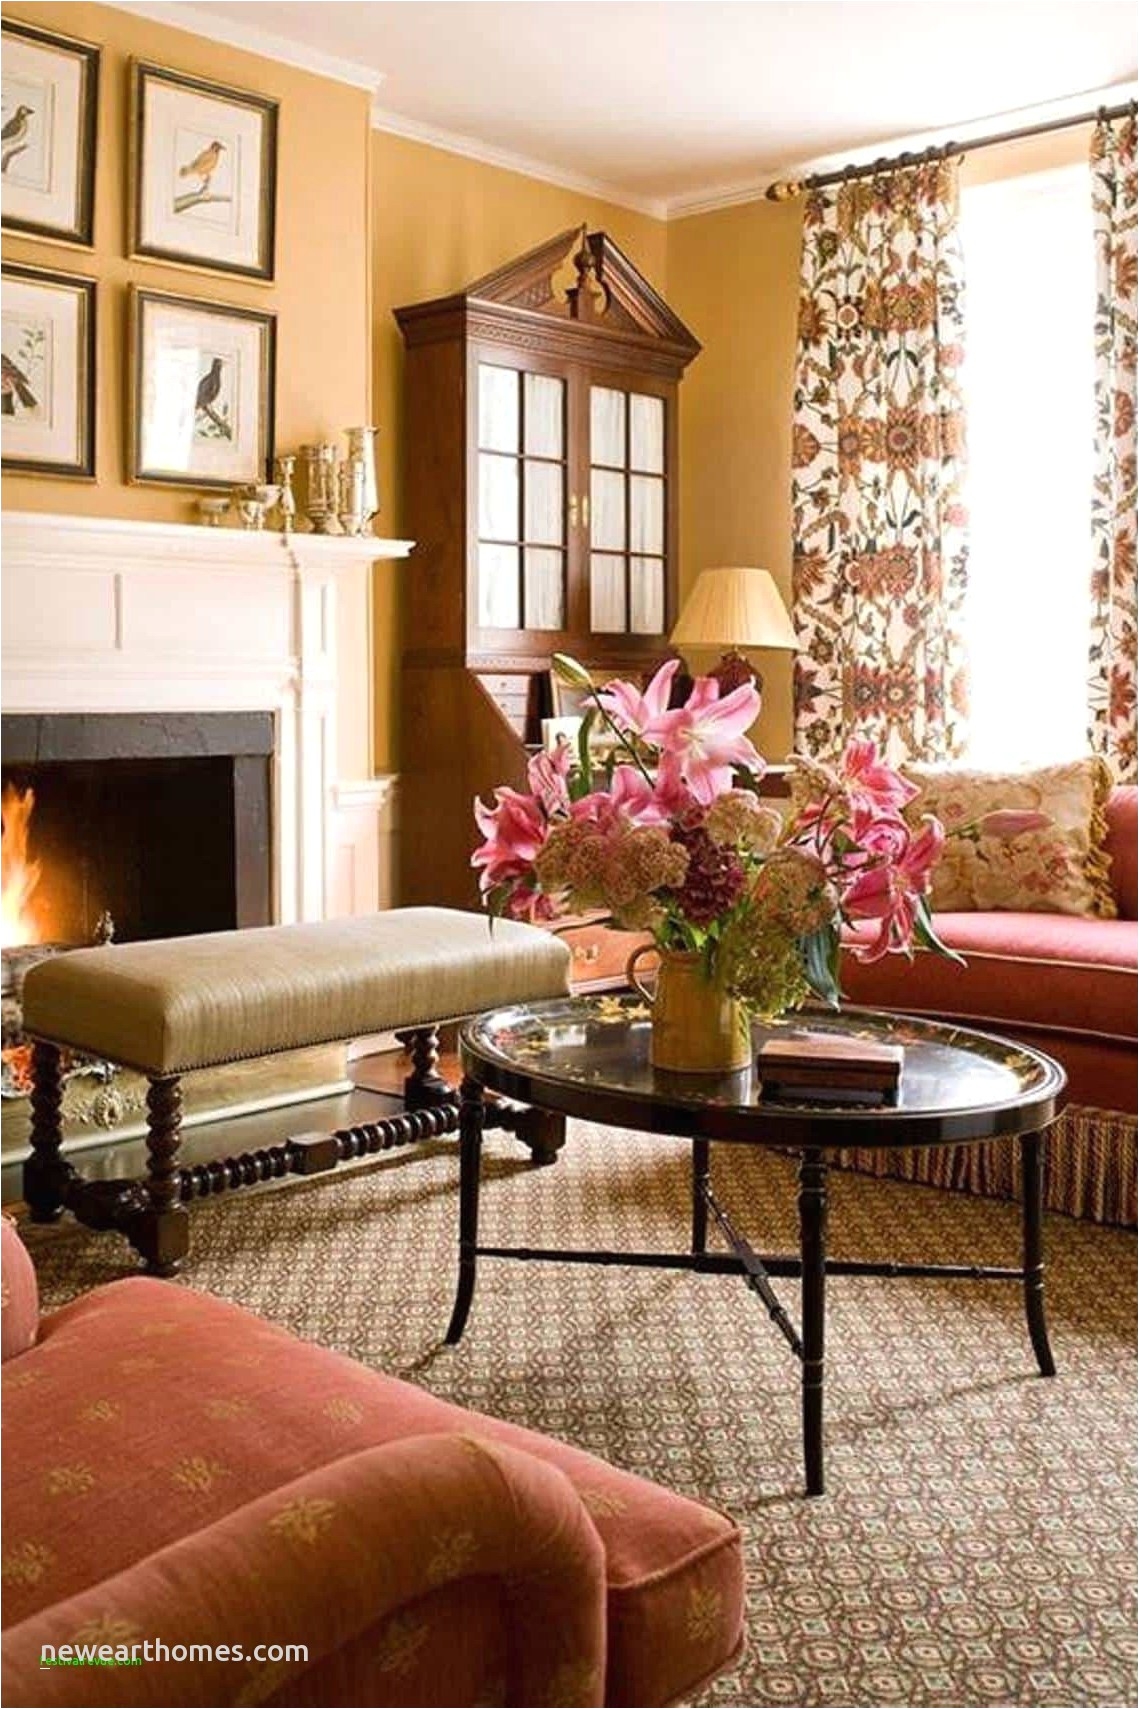 Living Room Flower Vaseh Vases Vase Like Architecture Interior Design Follow Us I 0d from Wall beautiful bedroom Archives onionskeen from designer master